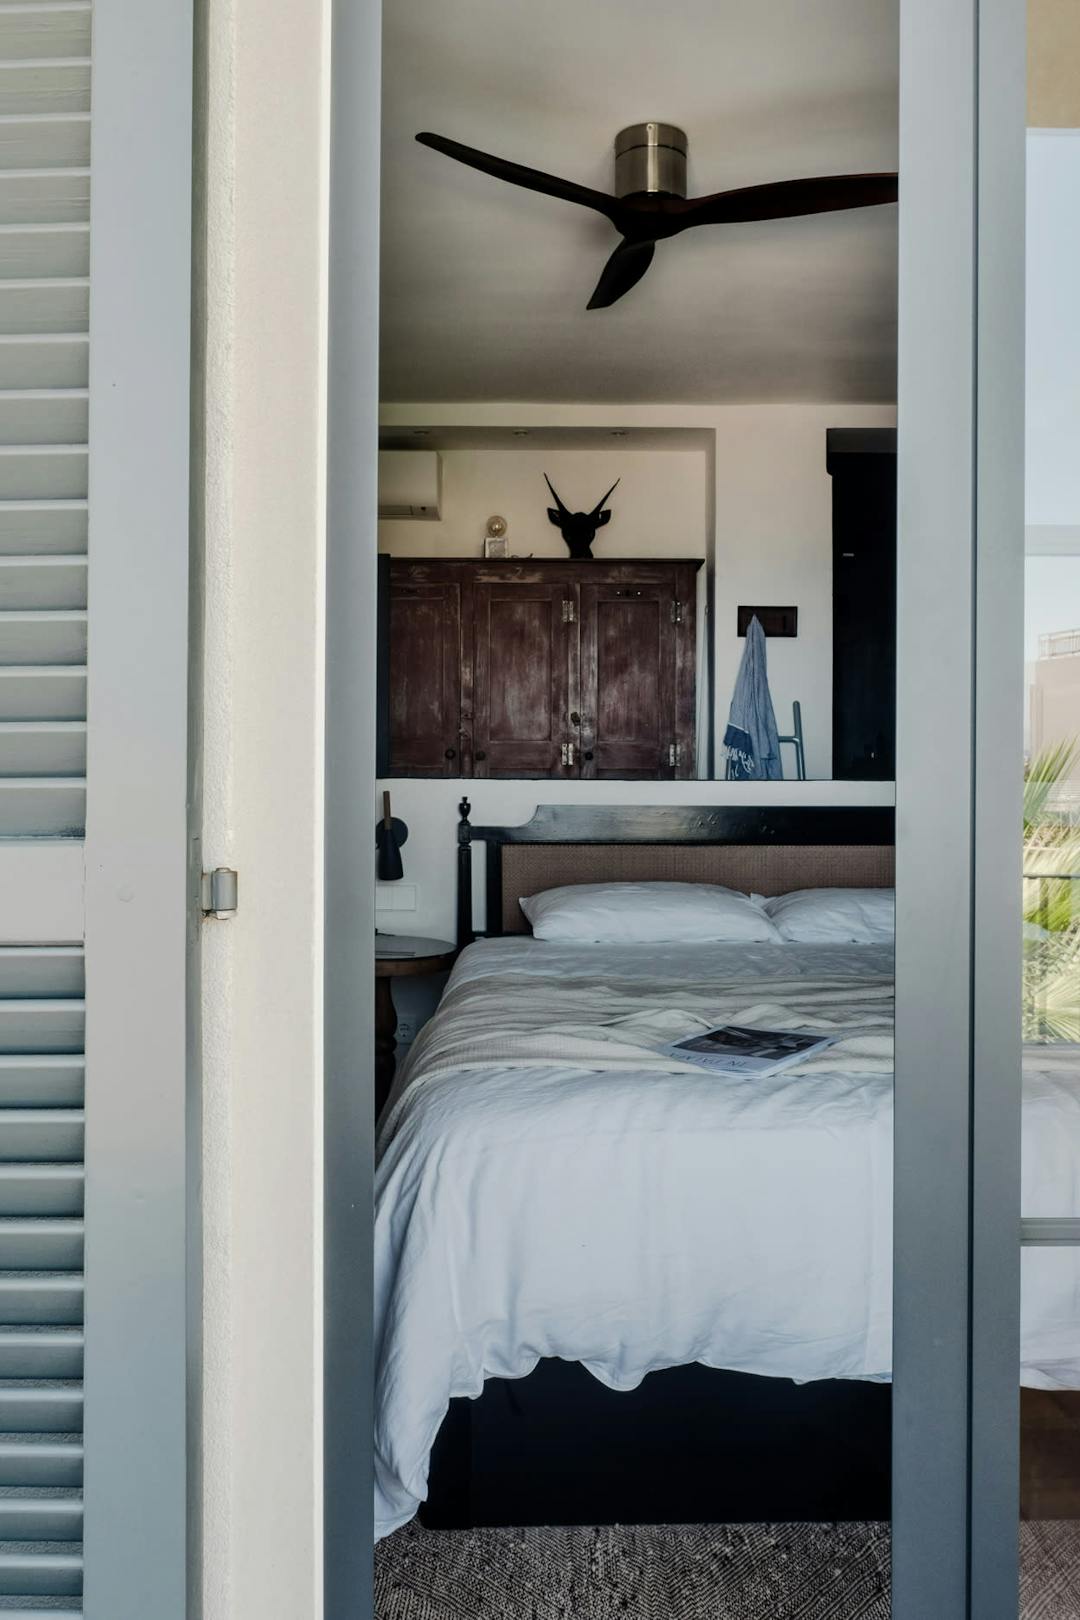 The image features a bedroom with a neatly made bed, a ceiling fan, a window, and a door.